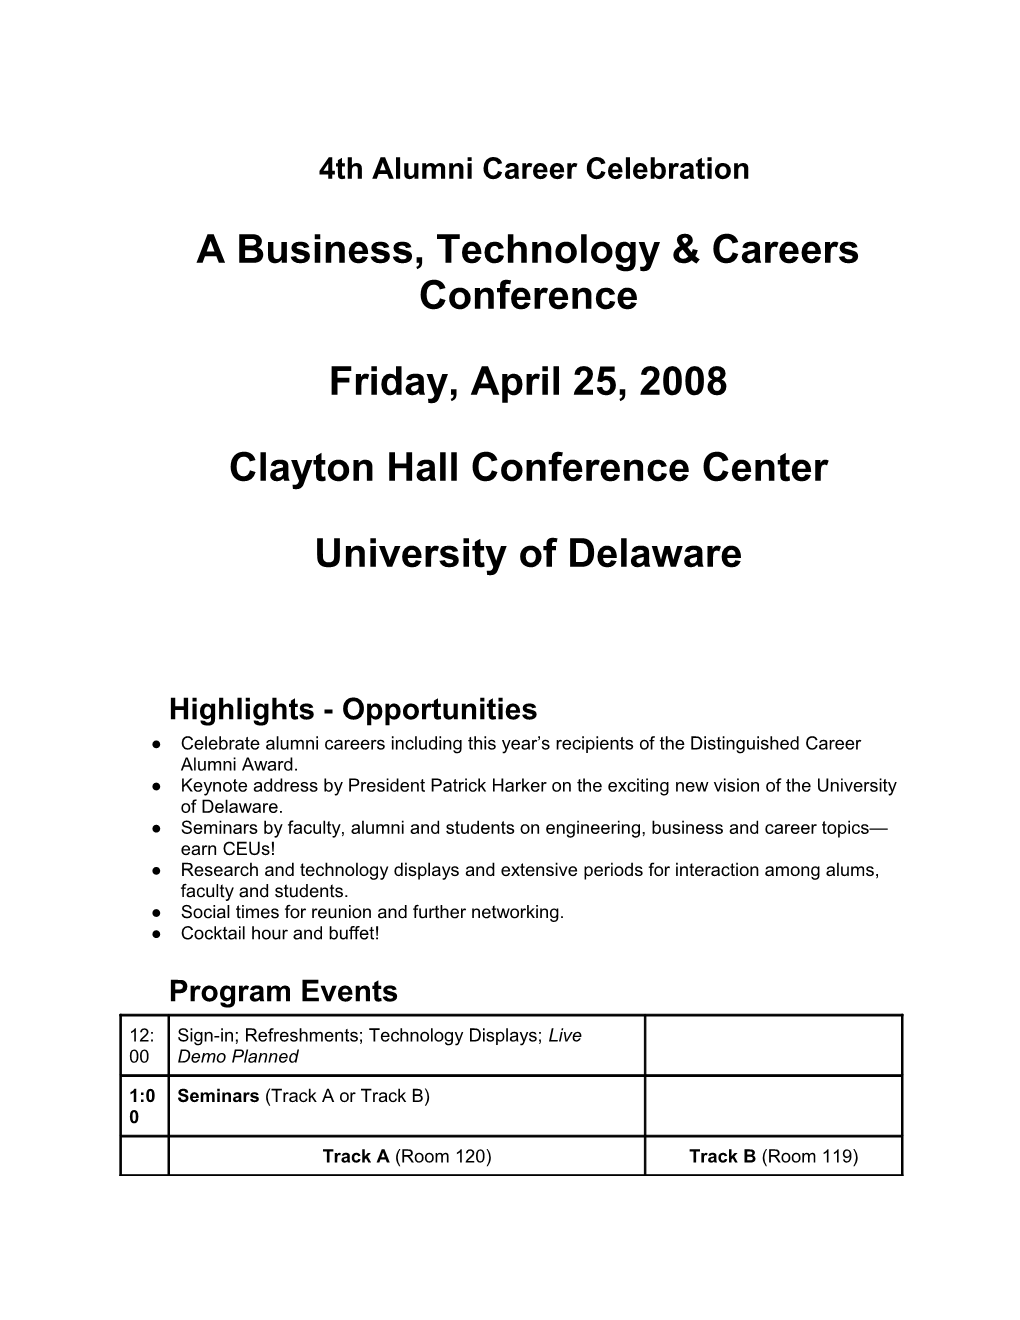 A Business, Technology & Careers Conference